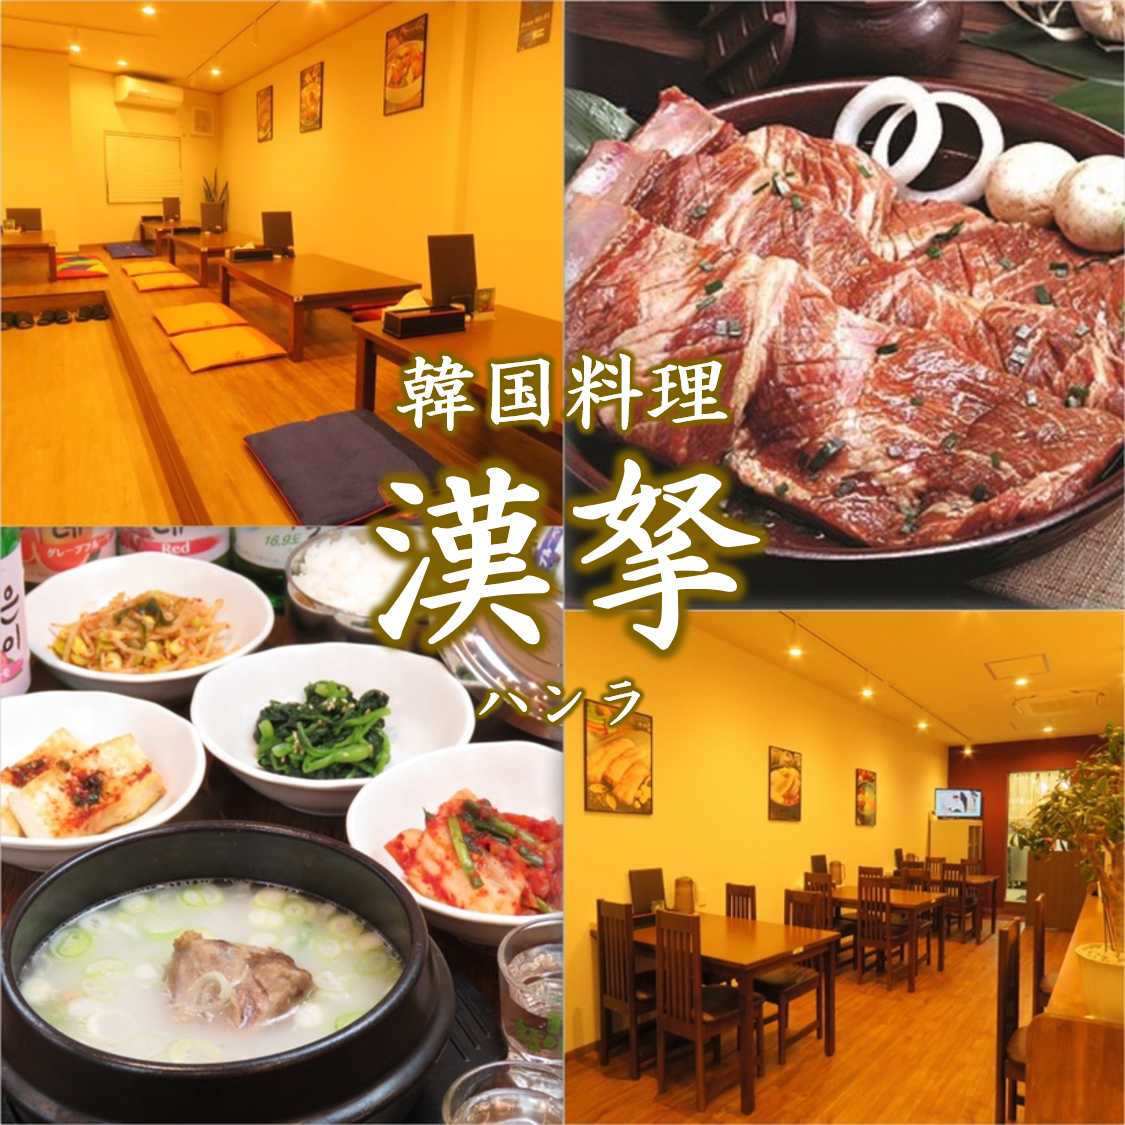 If you want to enjoy the authentic Korean taste in Fuse, go to Hanla! There are also course meals that are perfect for banquets ♪